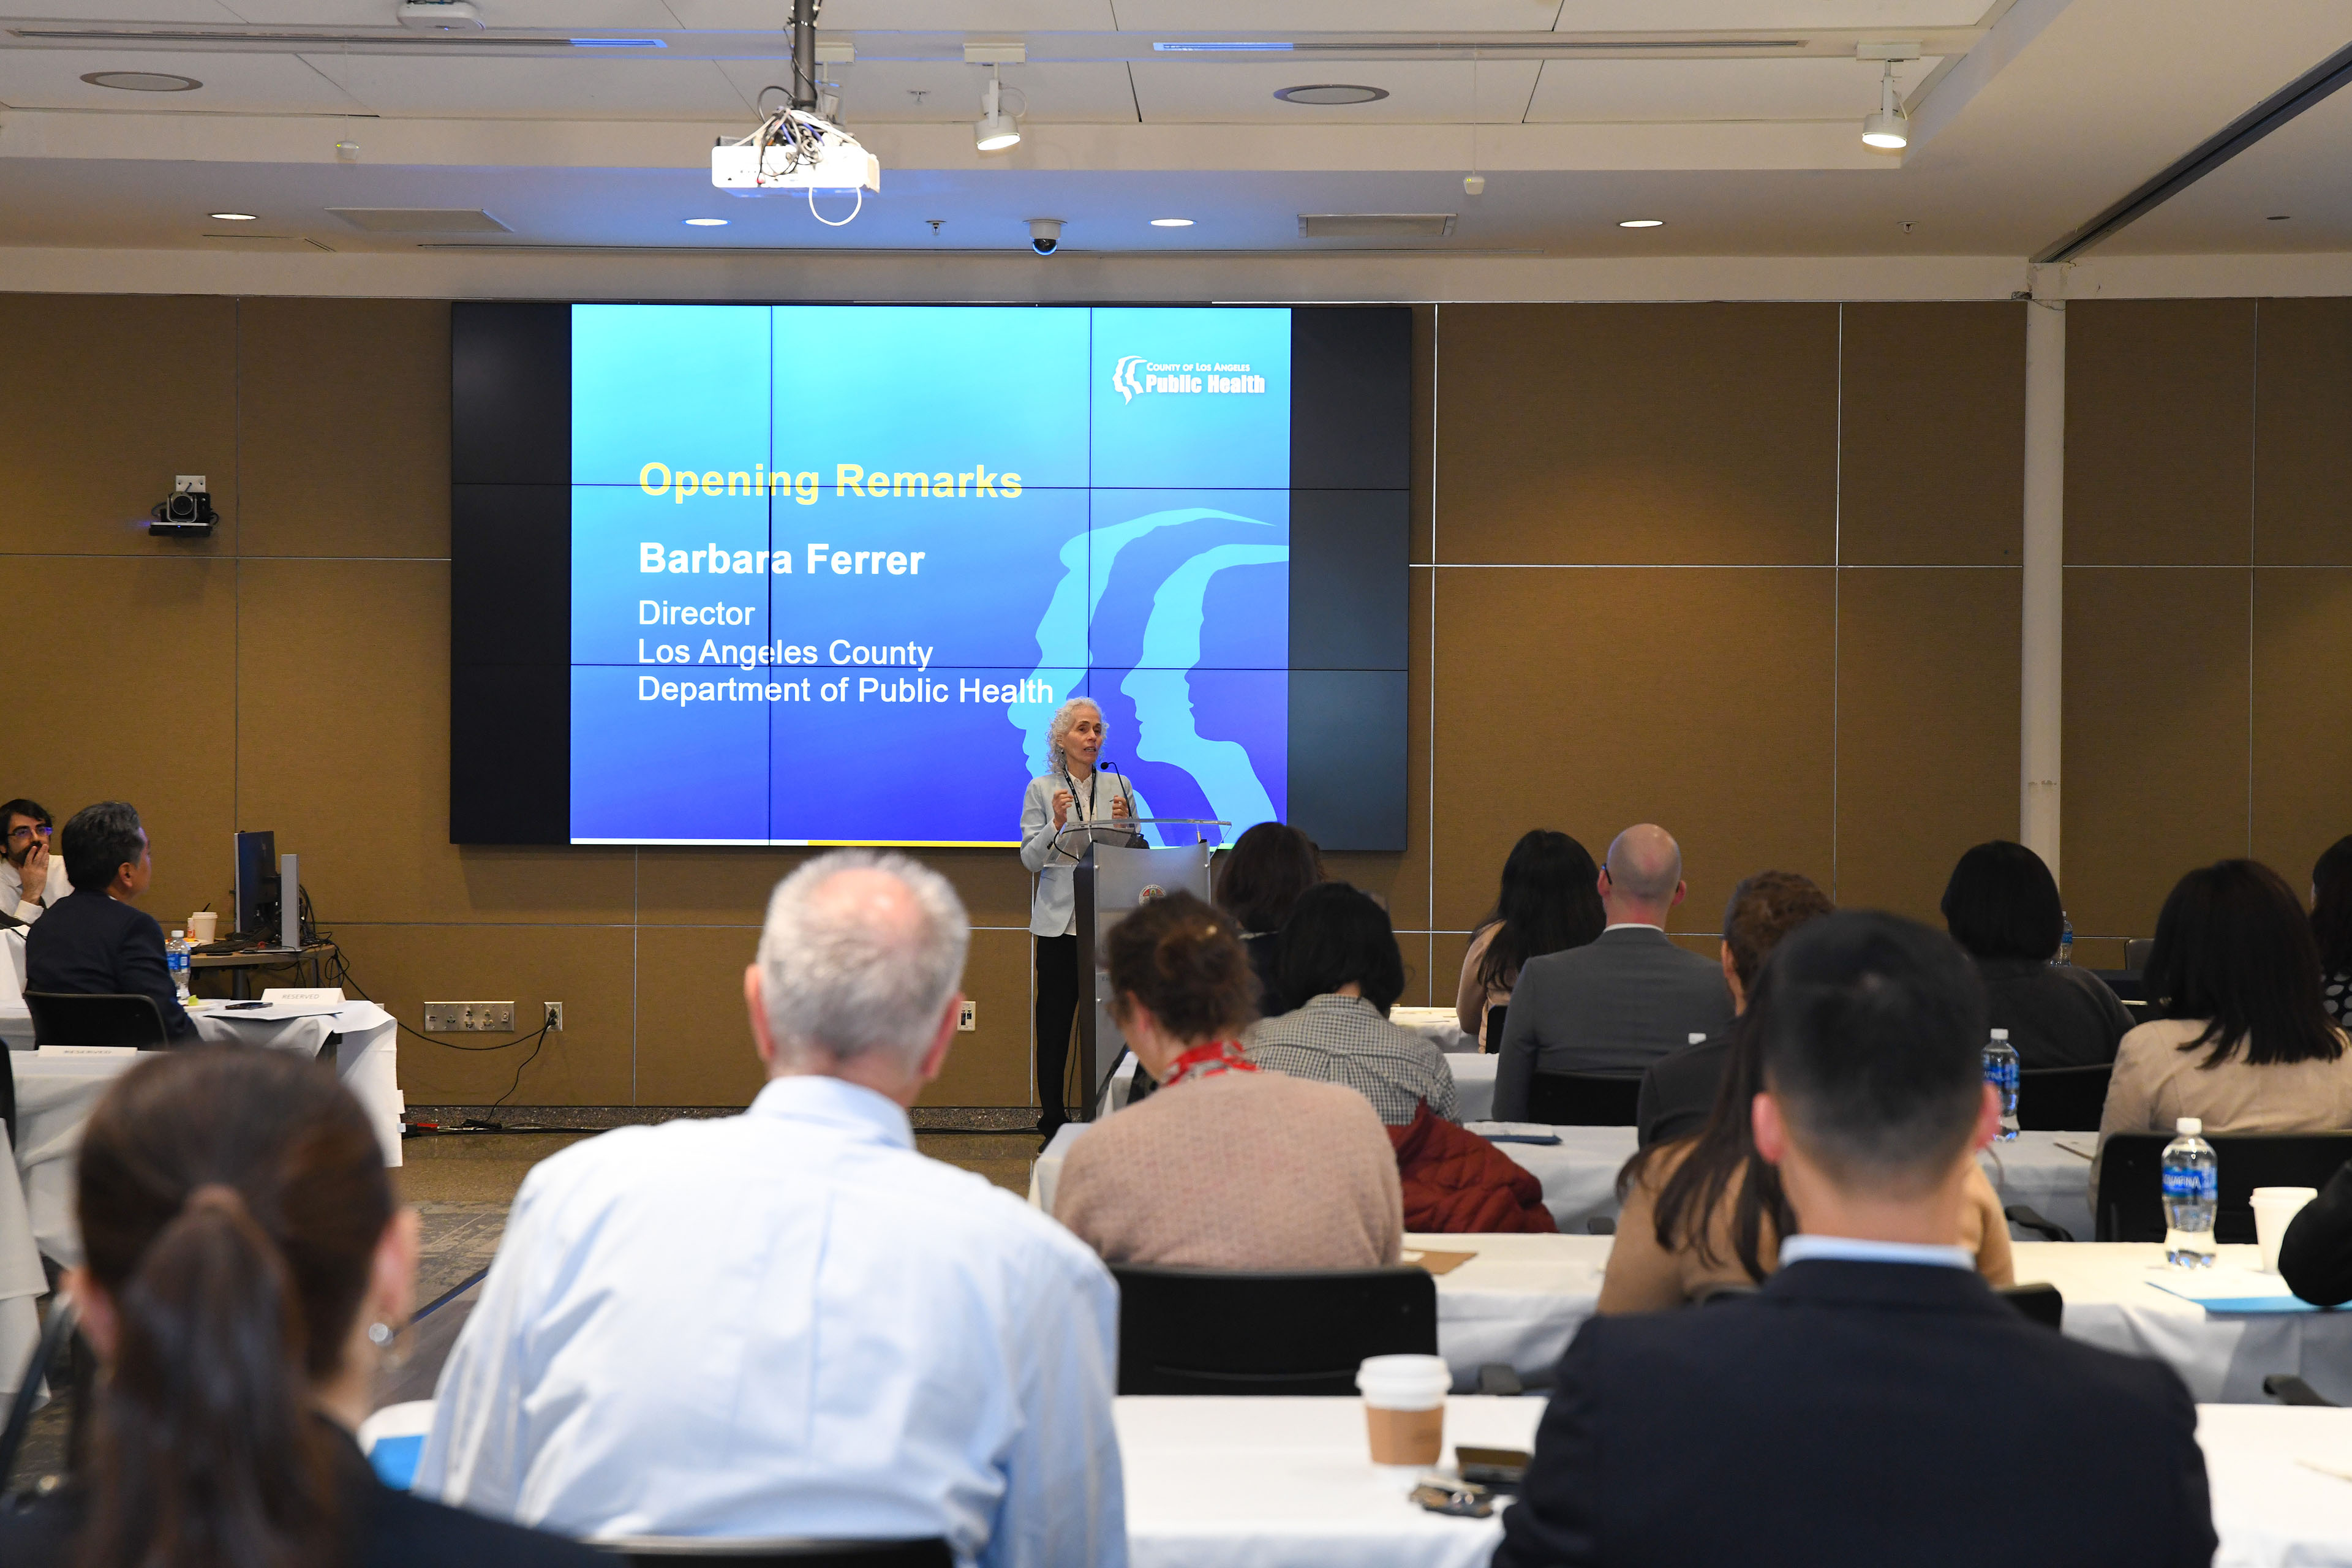 Barbara Ferrer is speaking at a podium at the front of a conference-like room. There is a projector screen behind her. It shows a slide with a blue background and white text that reads, "Opening Remarks / Barbara Ferrer / Director / Los Angeles County Department of Public Health."